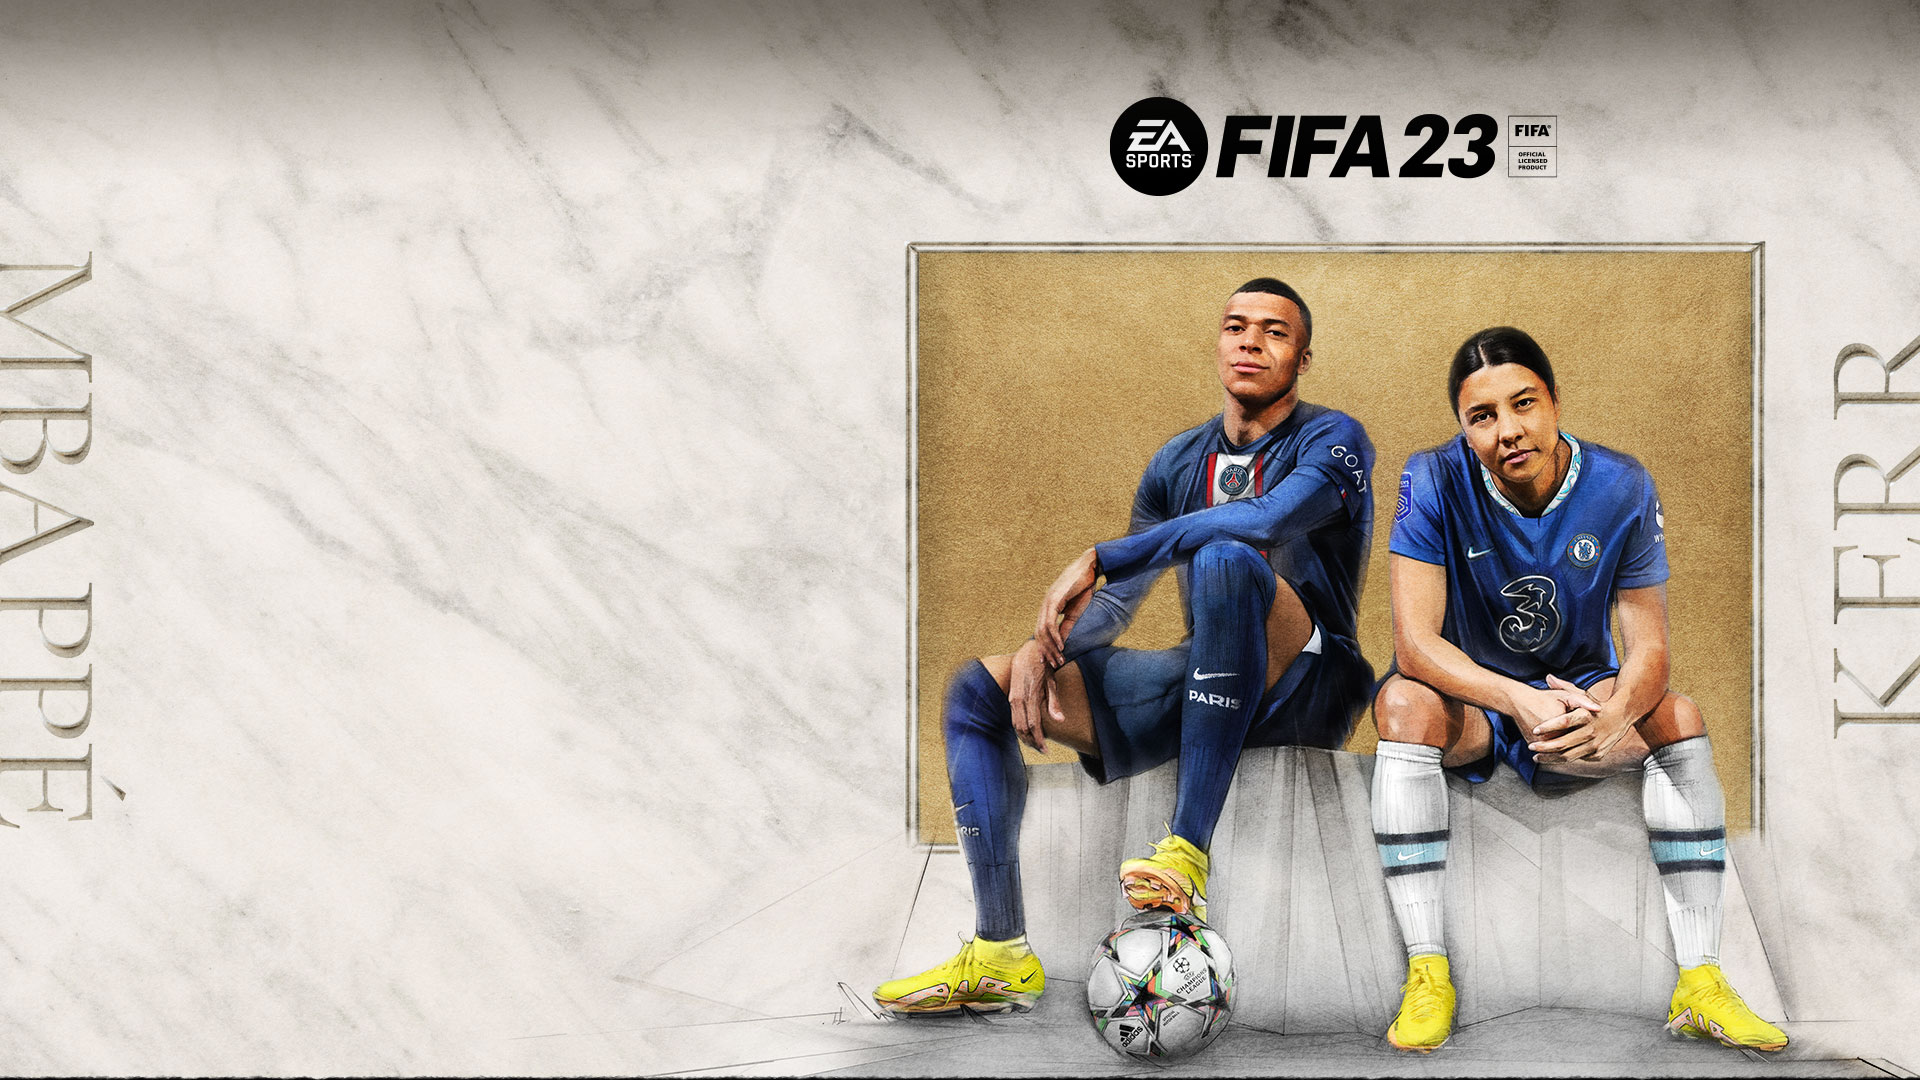 OTW FIFA 23, what are the Ones to Watch on FUT?